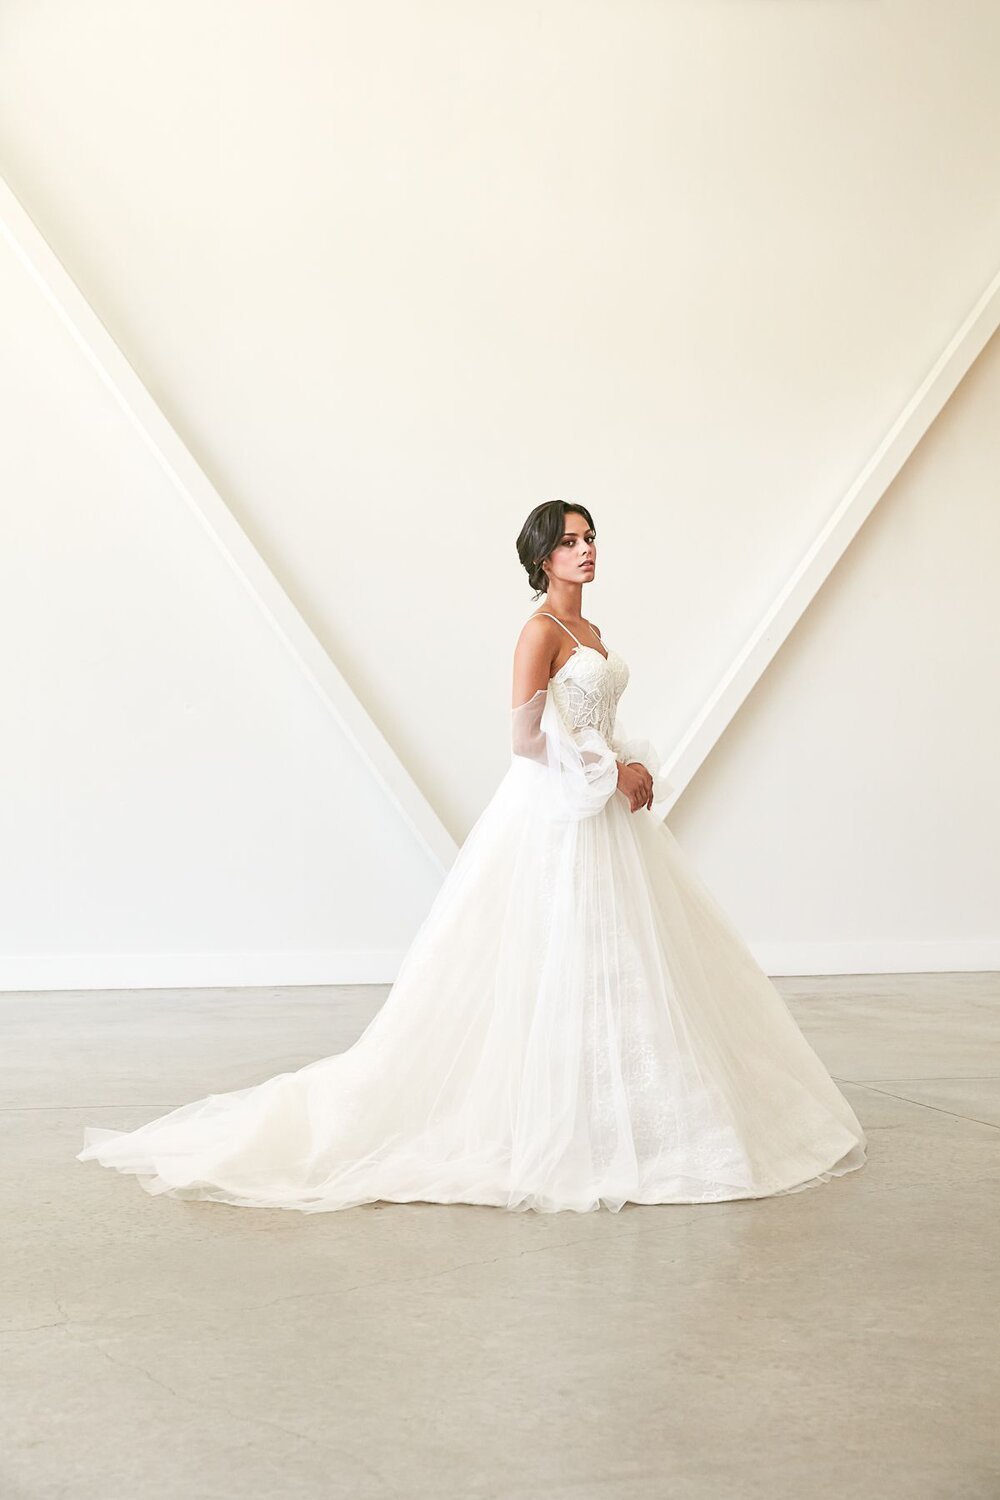 How to Style an Affordable Second Bridal Look